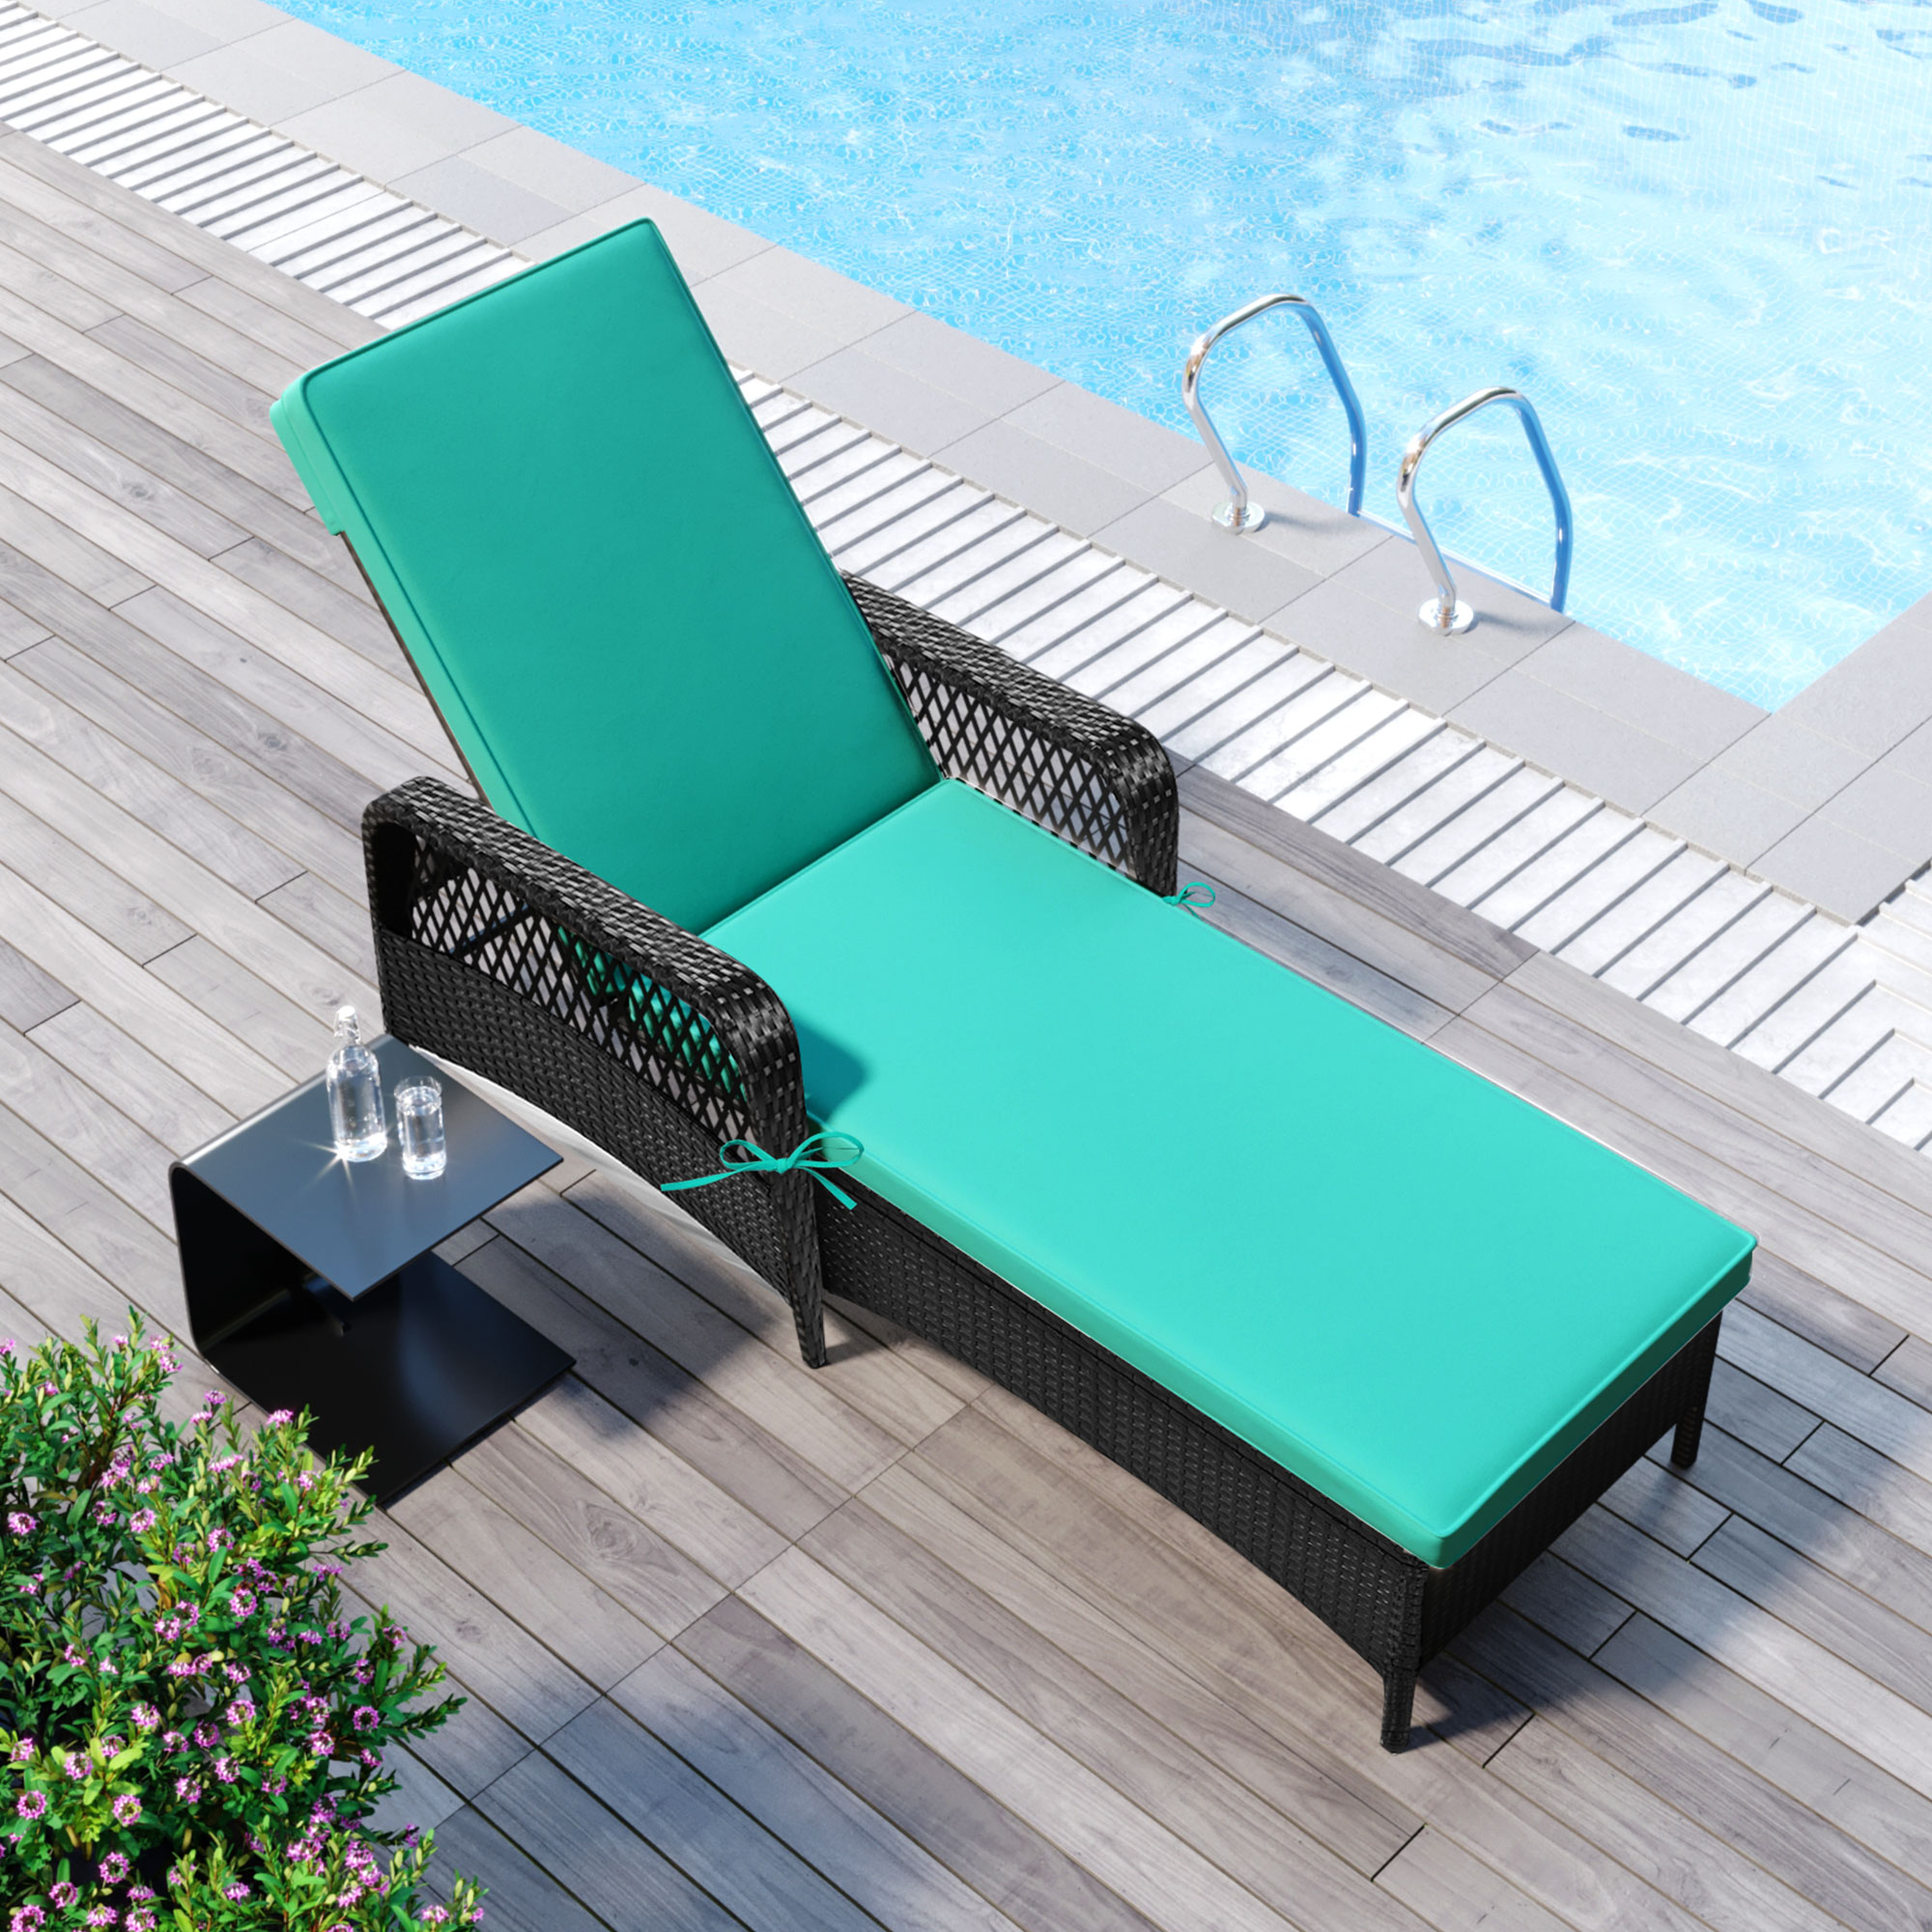 PE Rattan Chaise Lounge Set, 1 Set Patio Chaise Lounge, Sun Lounger for Outside, Adjustable Backrest Recliners with Cushions, Rattan Reclining Chair Furniture for Garden Beach Pool, Green - image 1 of 8